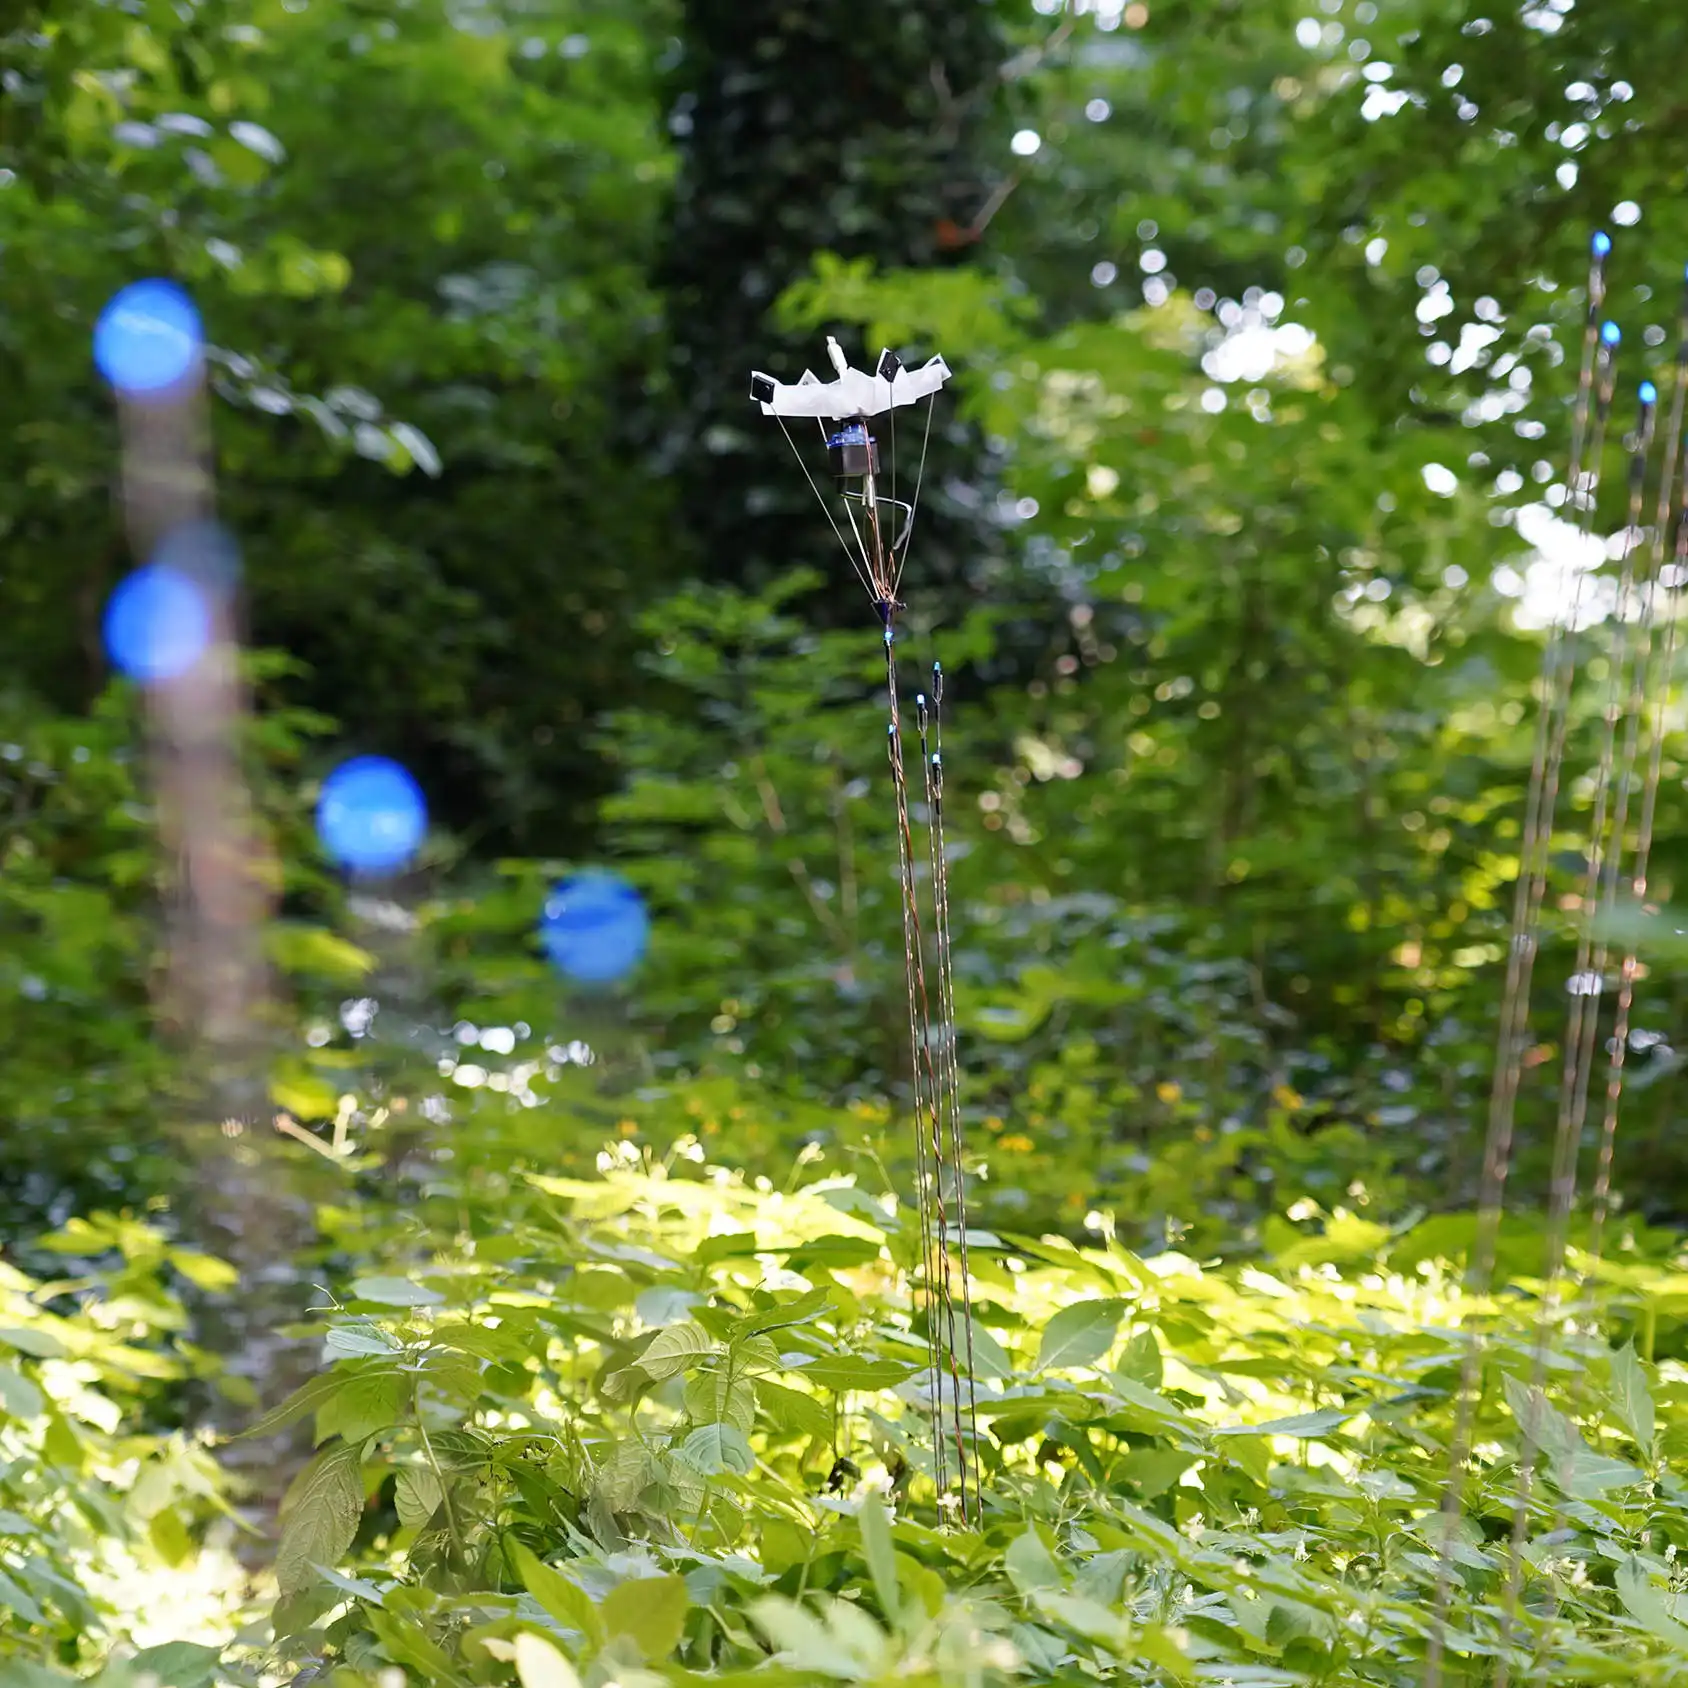 multiple slim rods with lights and a blossom attatched at the top are standing in a green and lush field in nature